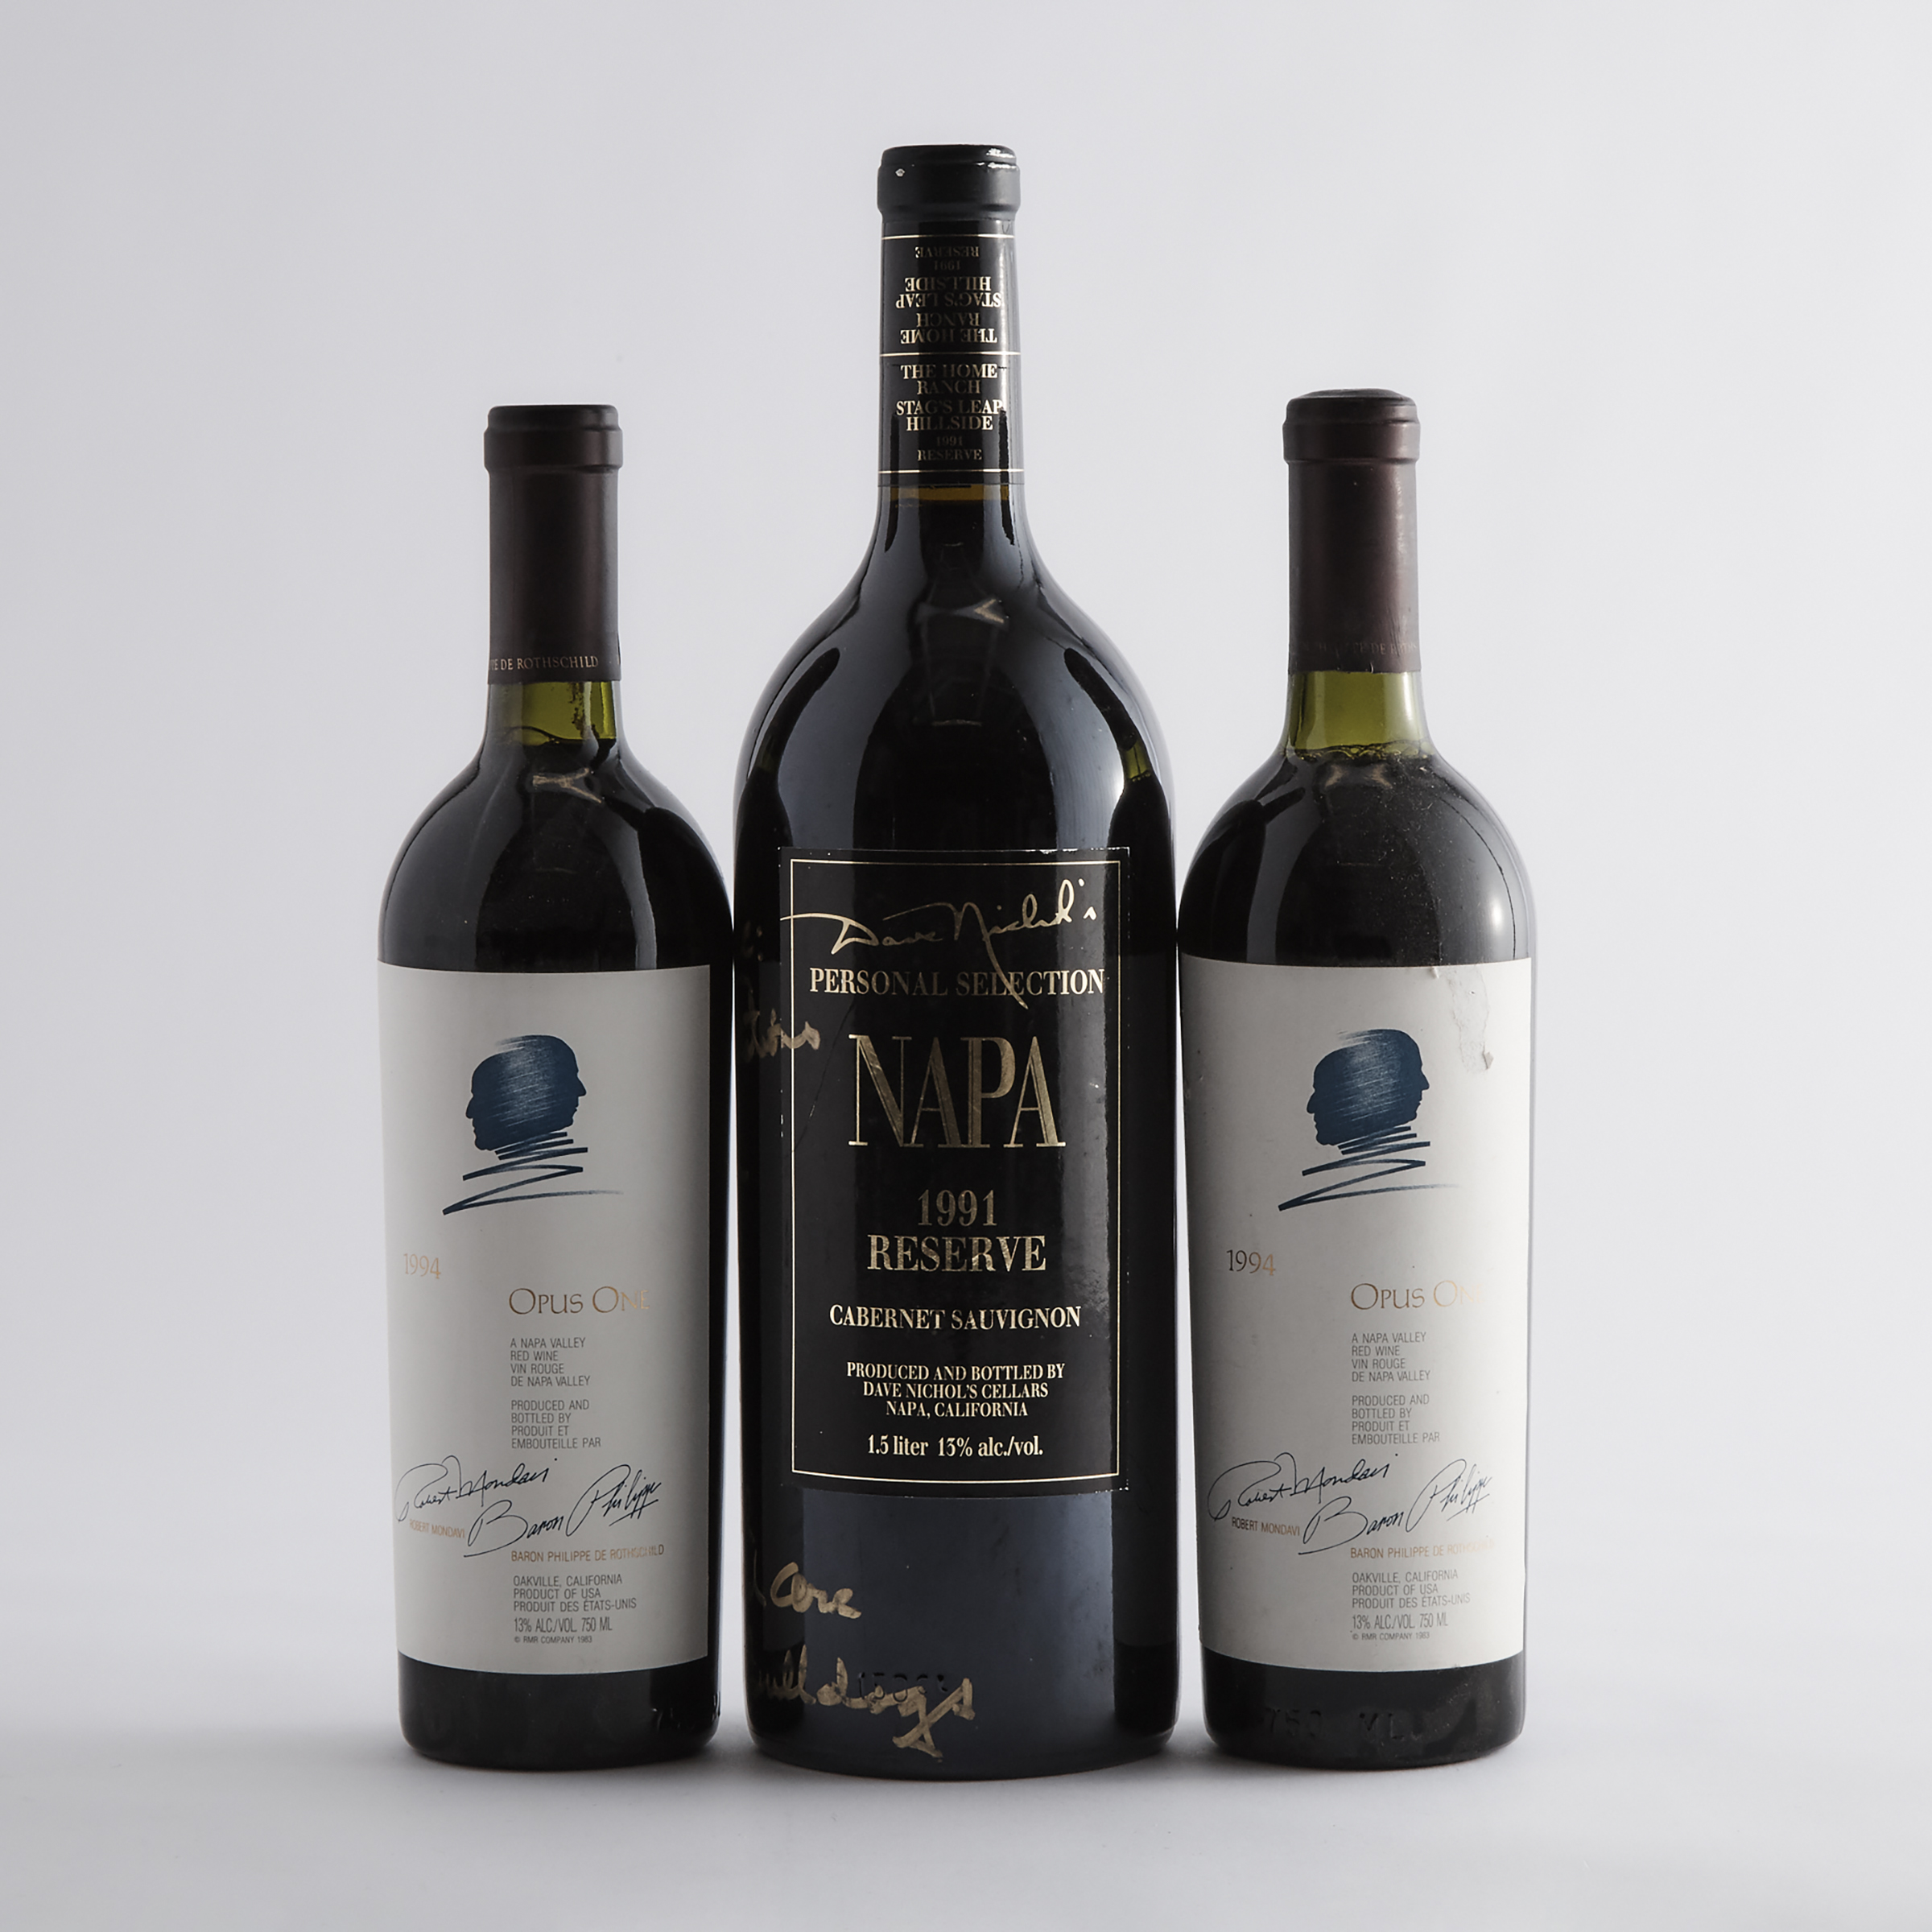 DAVE NICHOL'S CABERNET SAUVIGNON PERSONAL SELECTION THE HOME RANCH RESERVE 1991 (1 MAG.)
OPUS ONE 1994 (2)